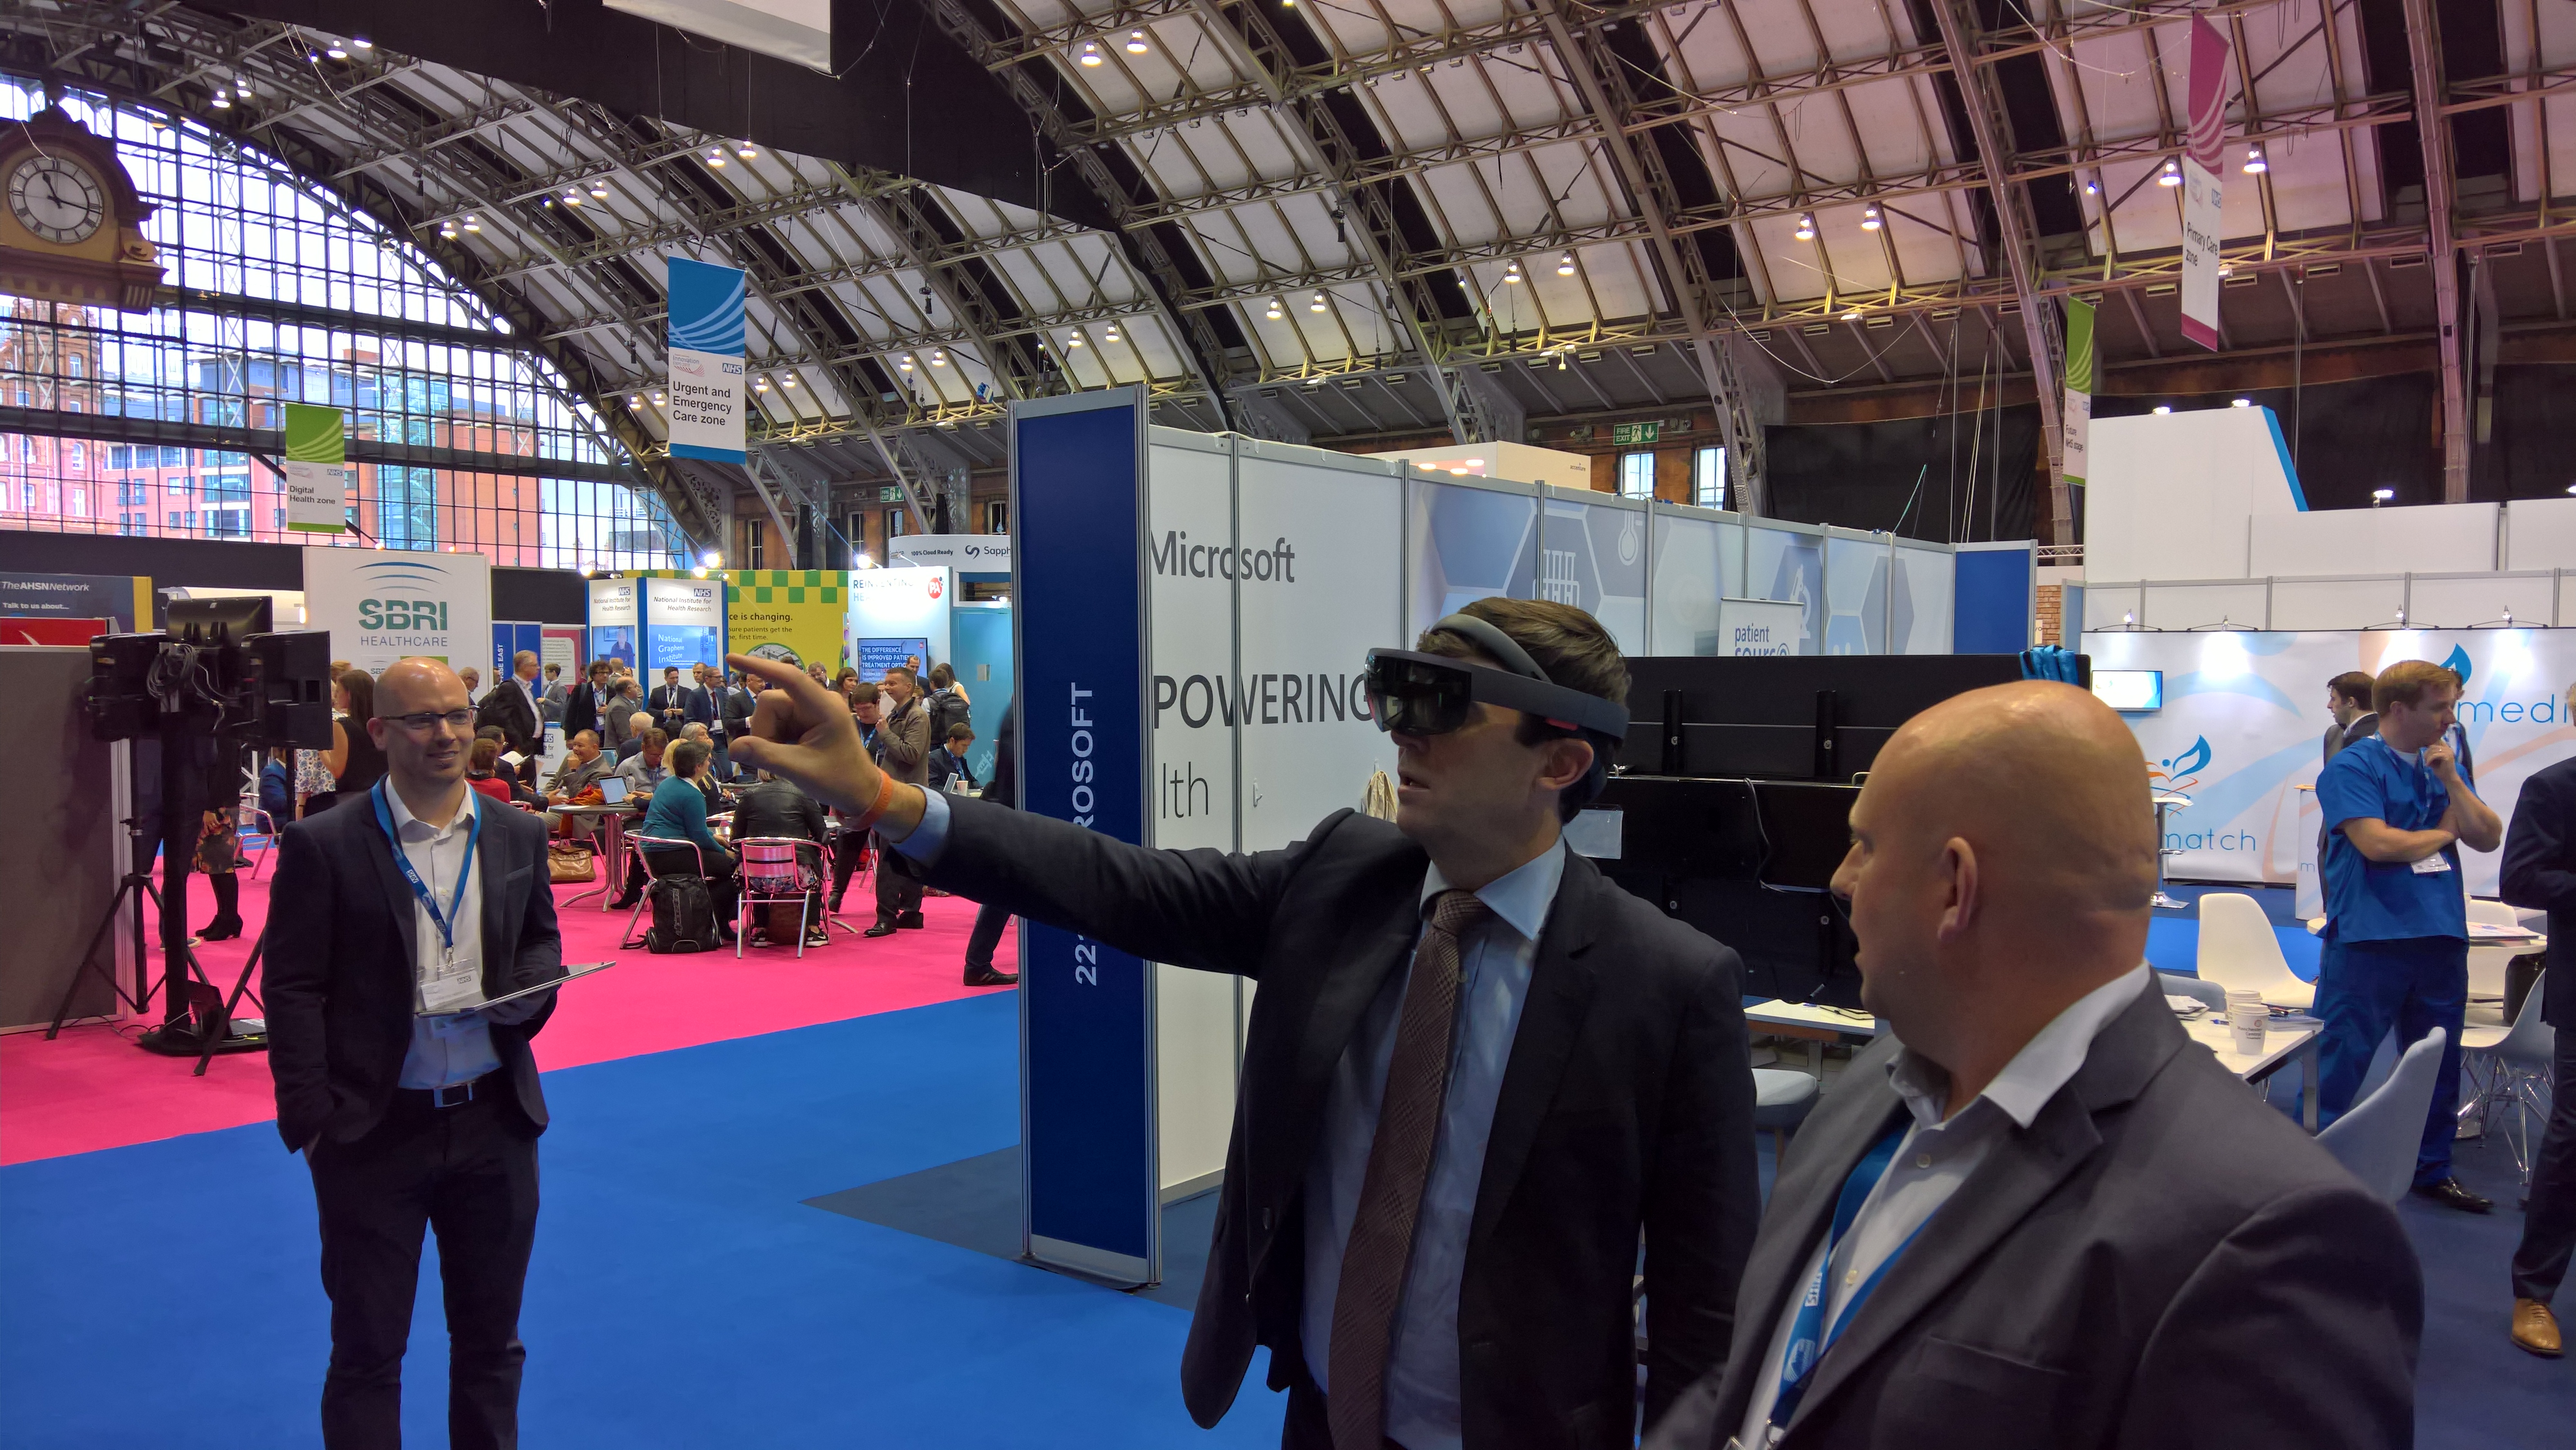 Andy Burnham tries HoloLens, Microsoft's mixed-reality headset